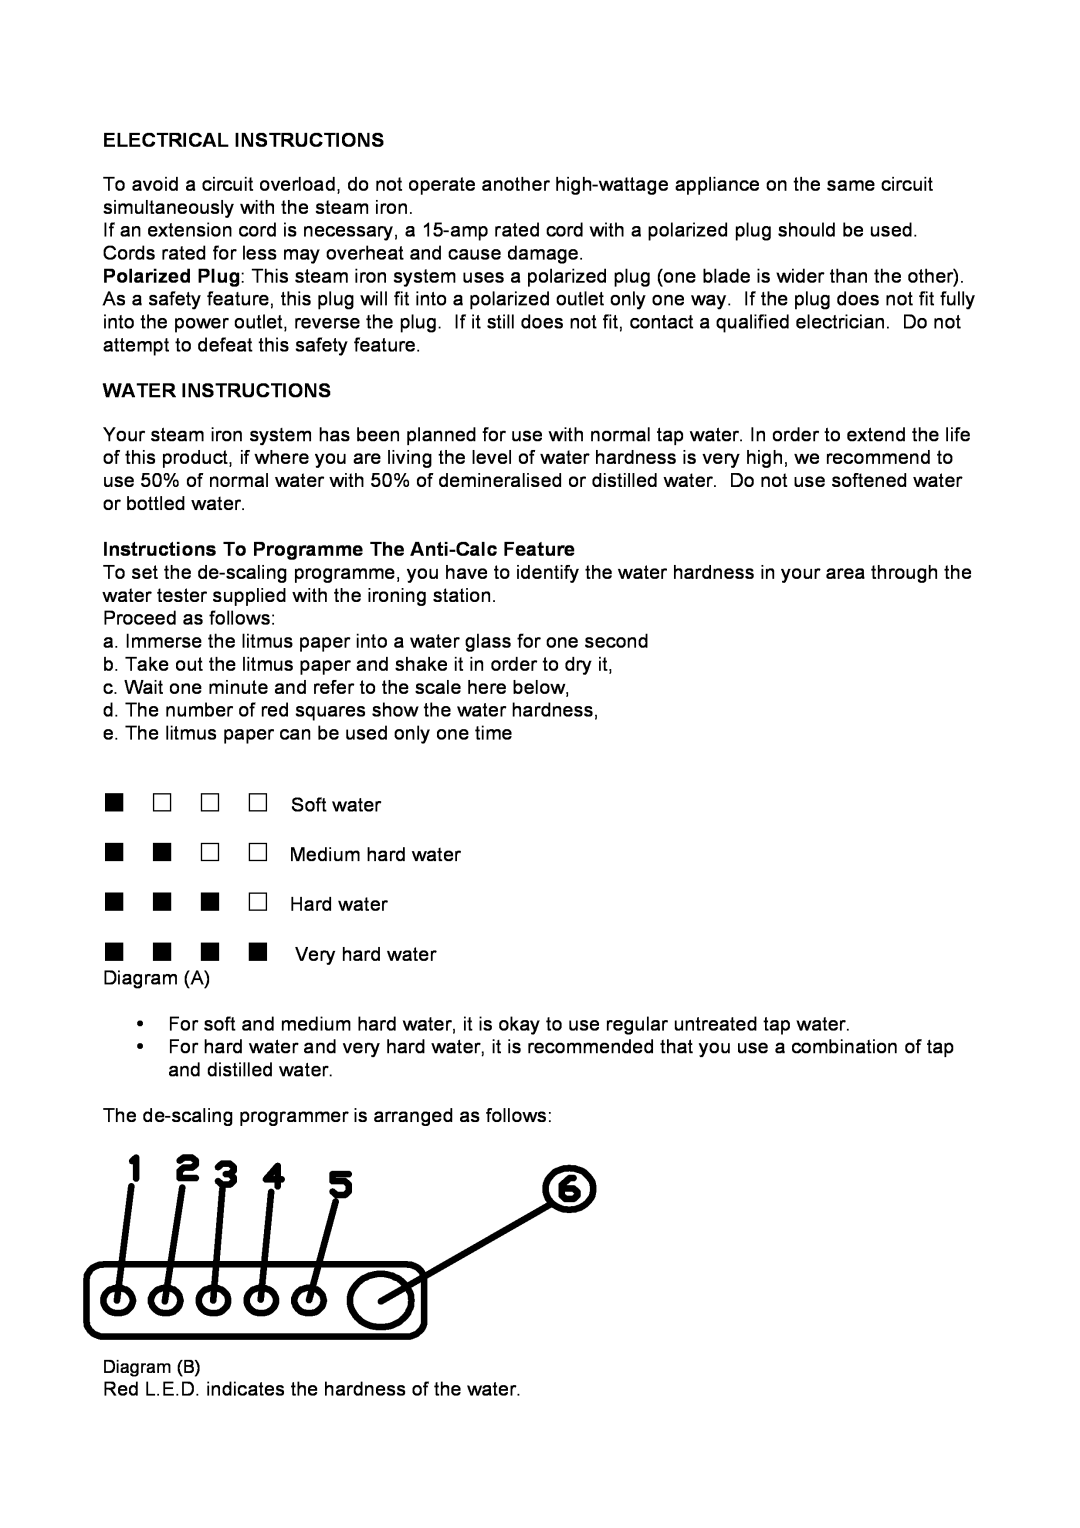 Reliable J490A Electrical Instructions, Water Instructions, Instructions To Programme The Anti-Calc Feature 